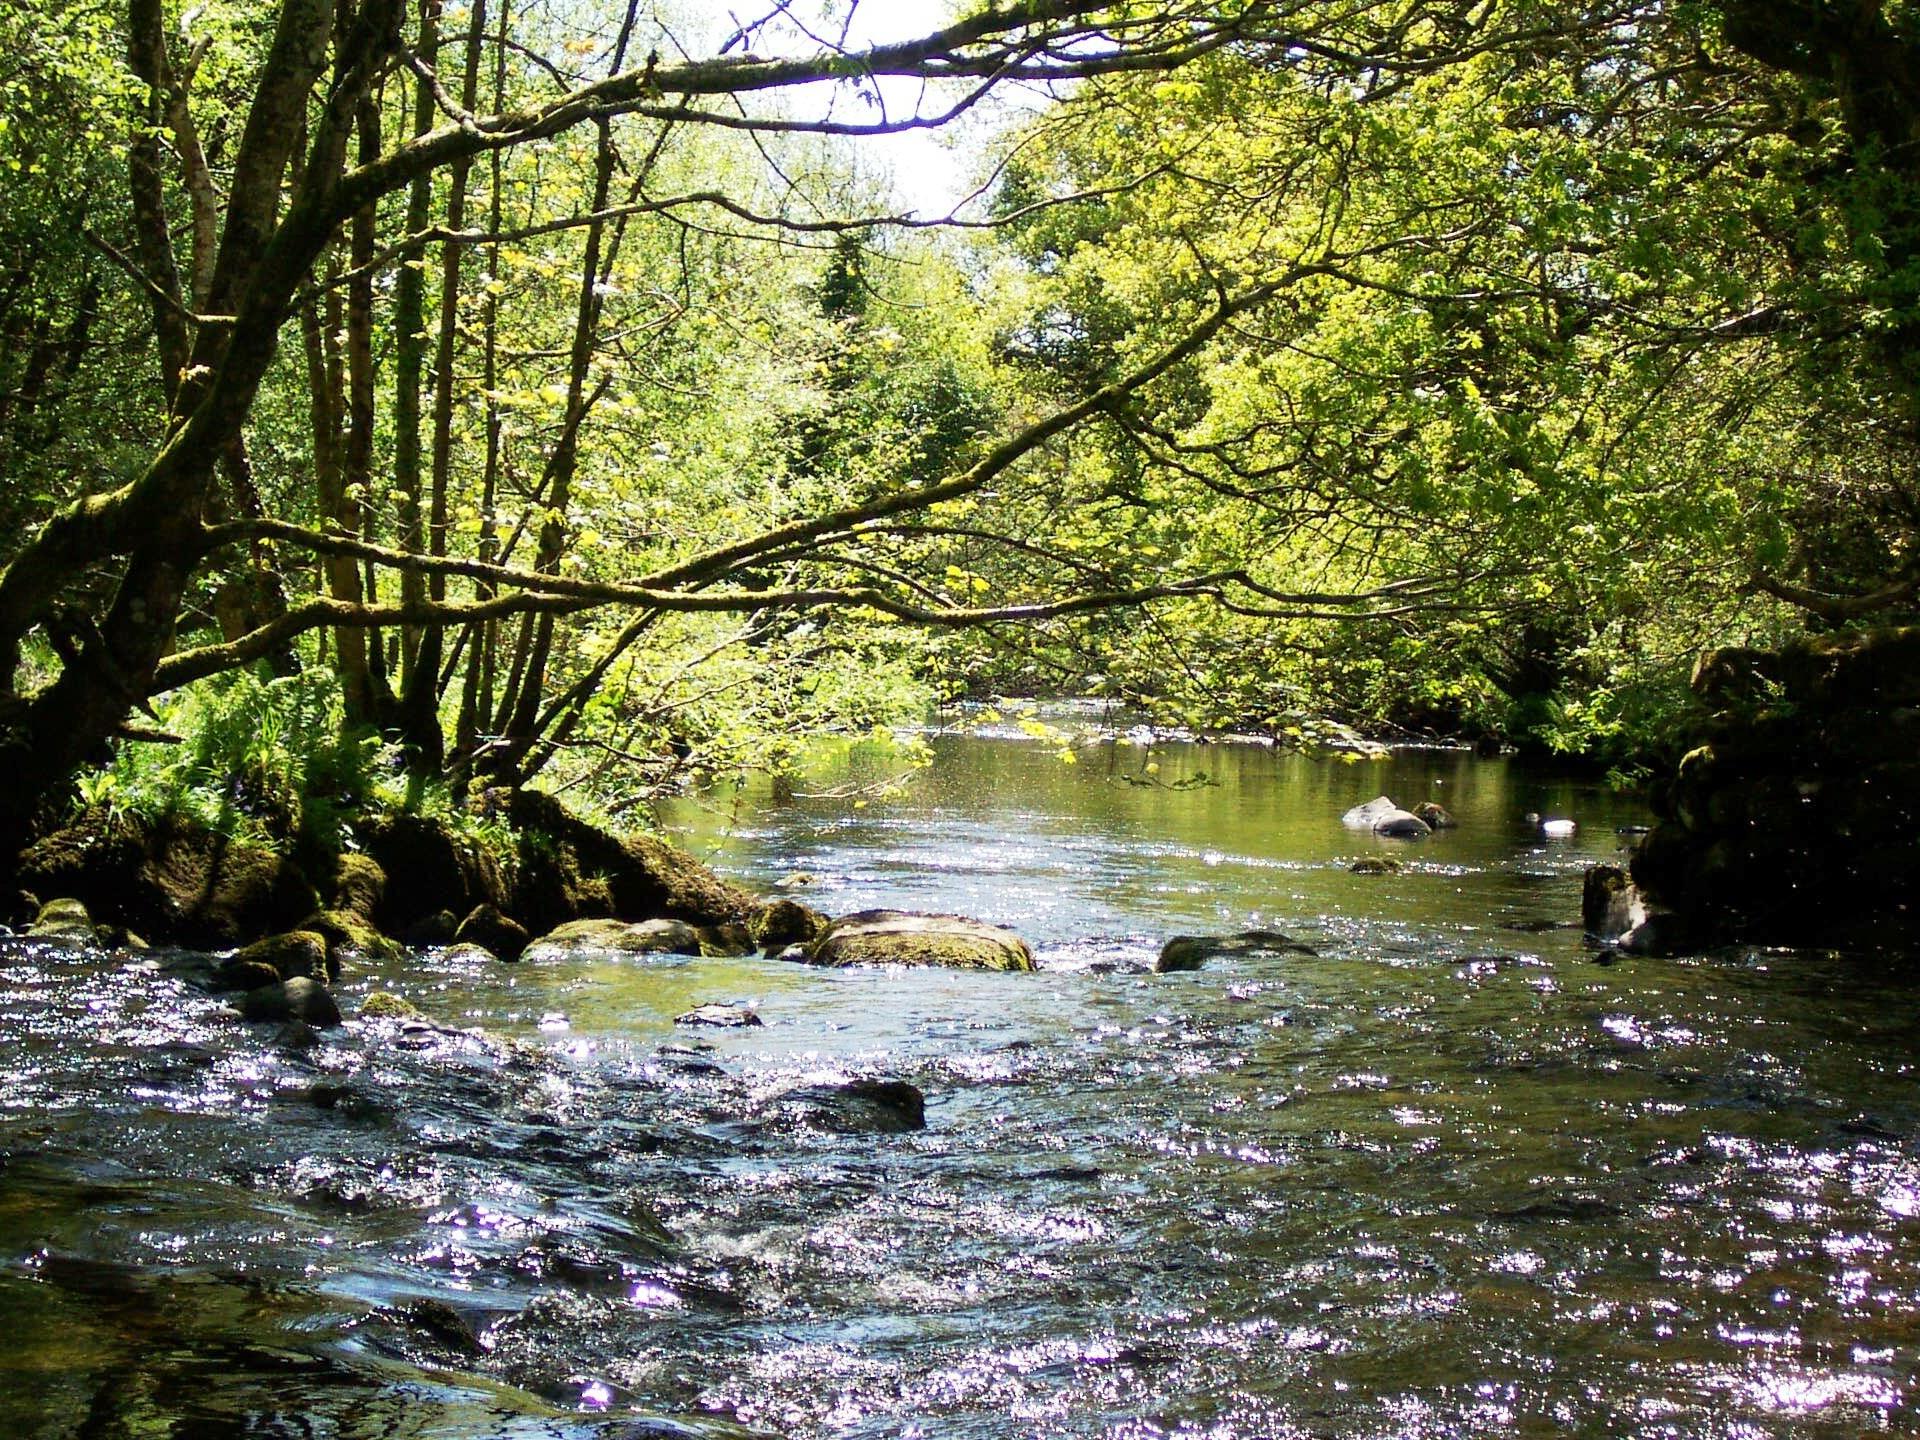 Fishing on the River Dwyfach near to Betws Bach